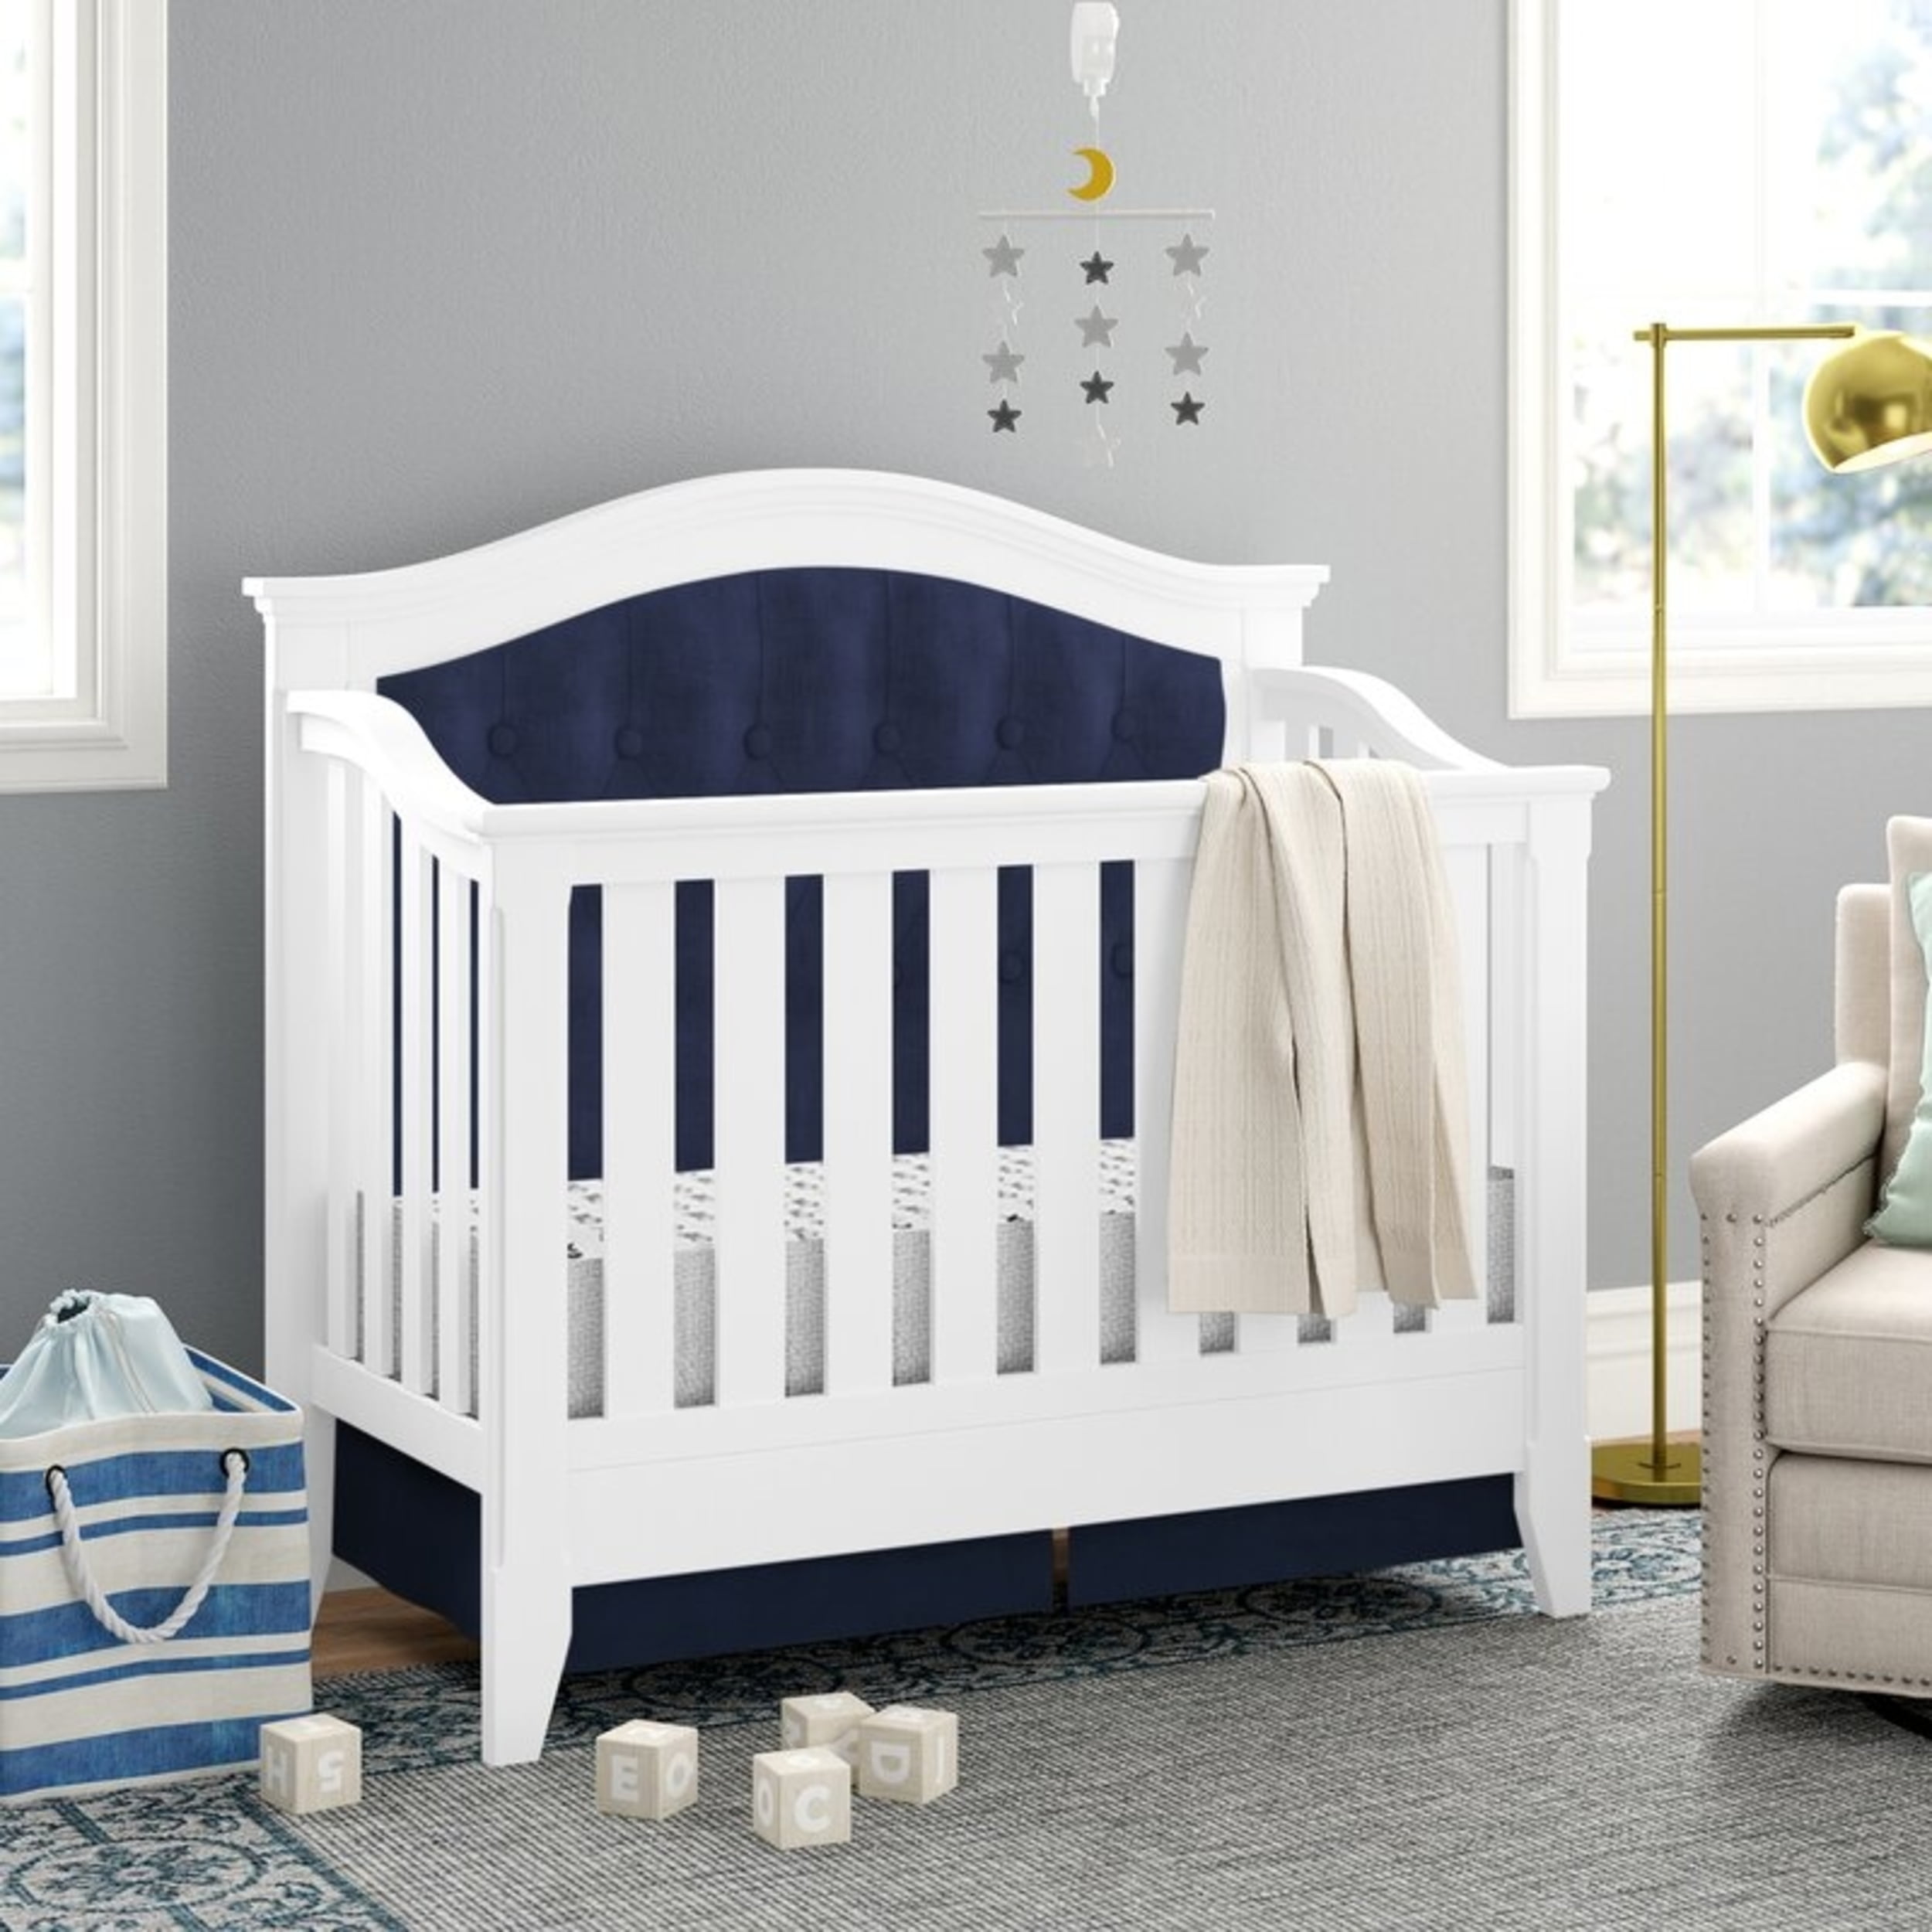 Magnolia Upholstered 4in1 Convertible Crib White/Navy